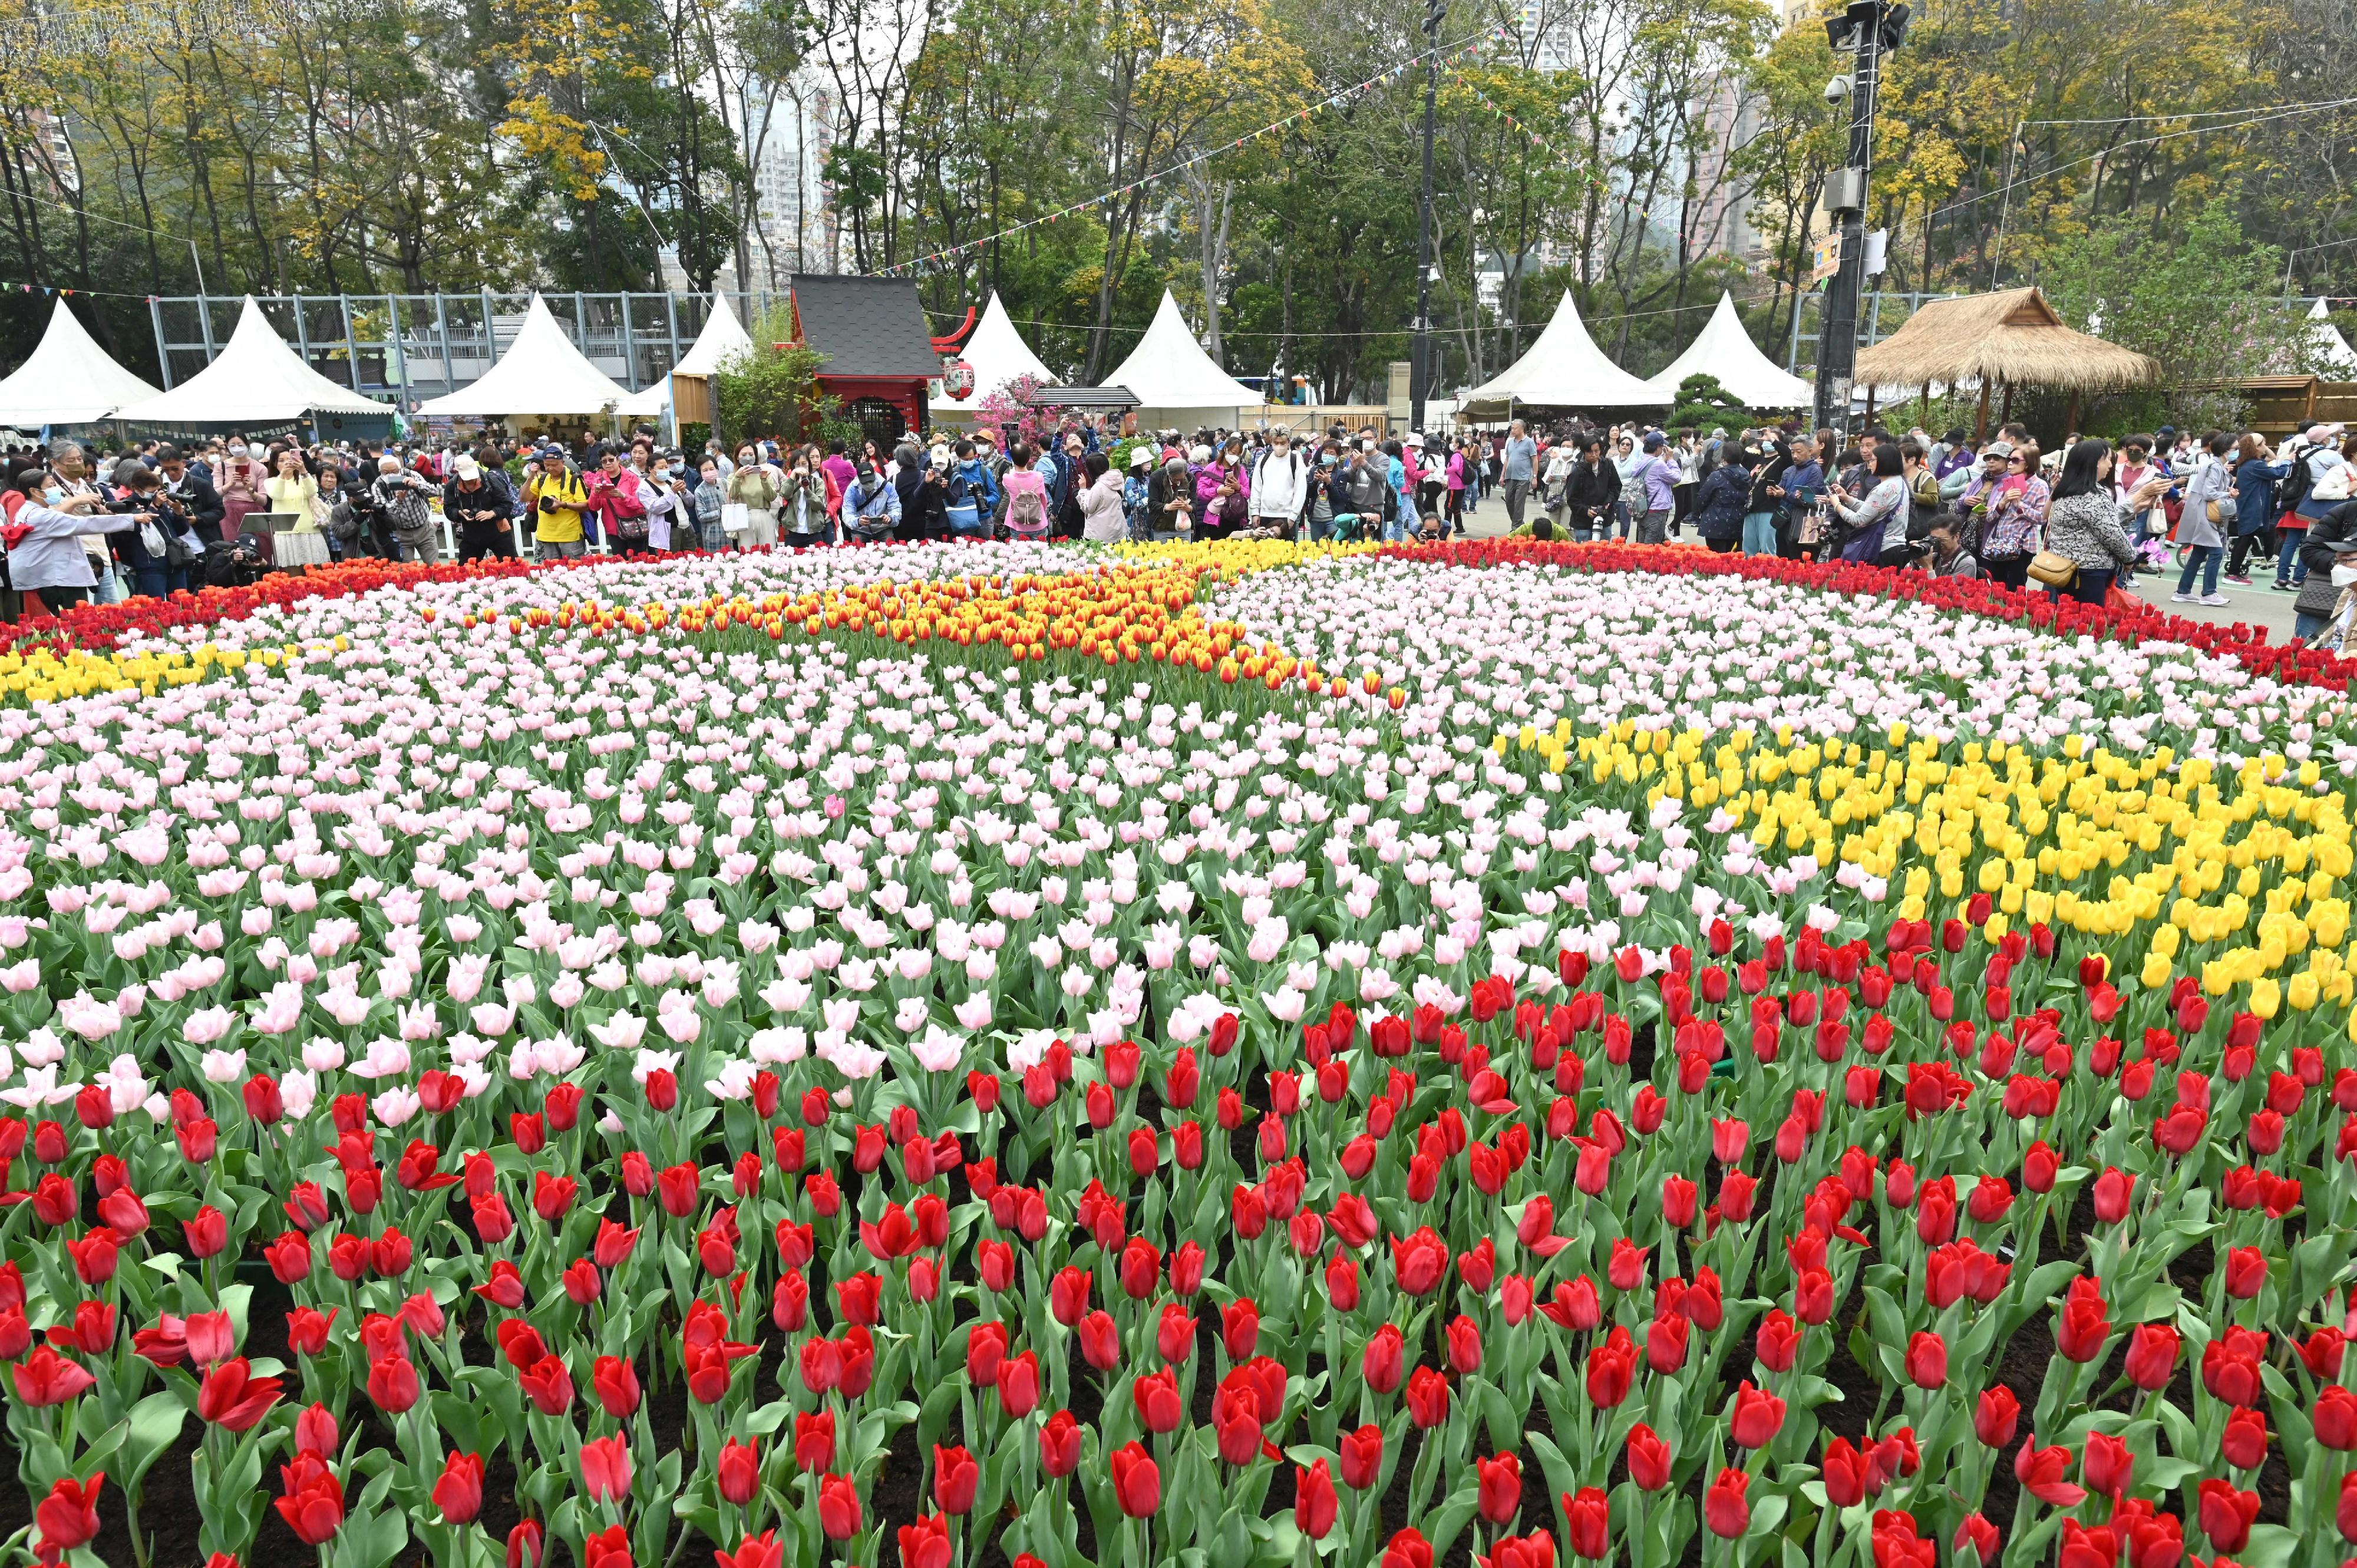 Entries for the Bliss in Bloom photo competition, one of the activities of Hong Kong Flower Show 2023 which has concluded earlier, will close on April 11.